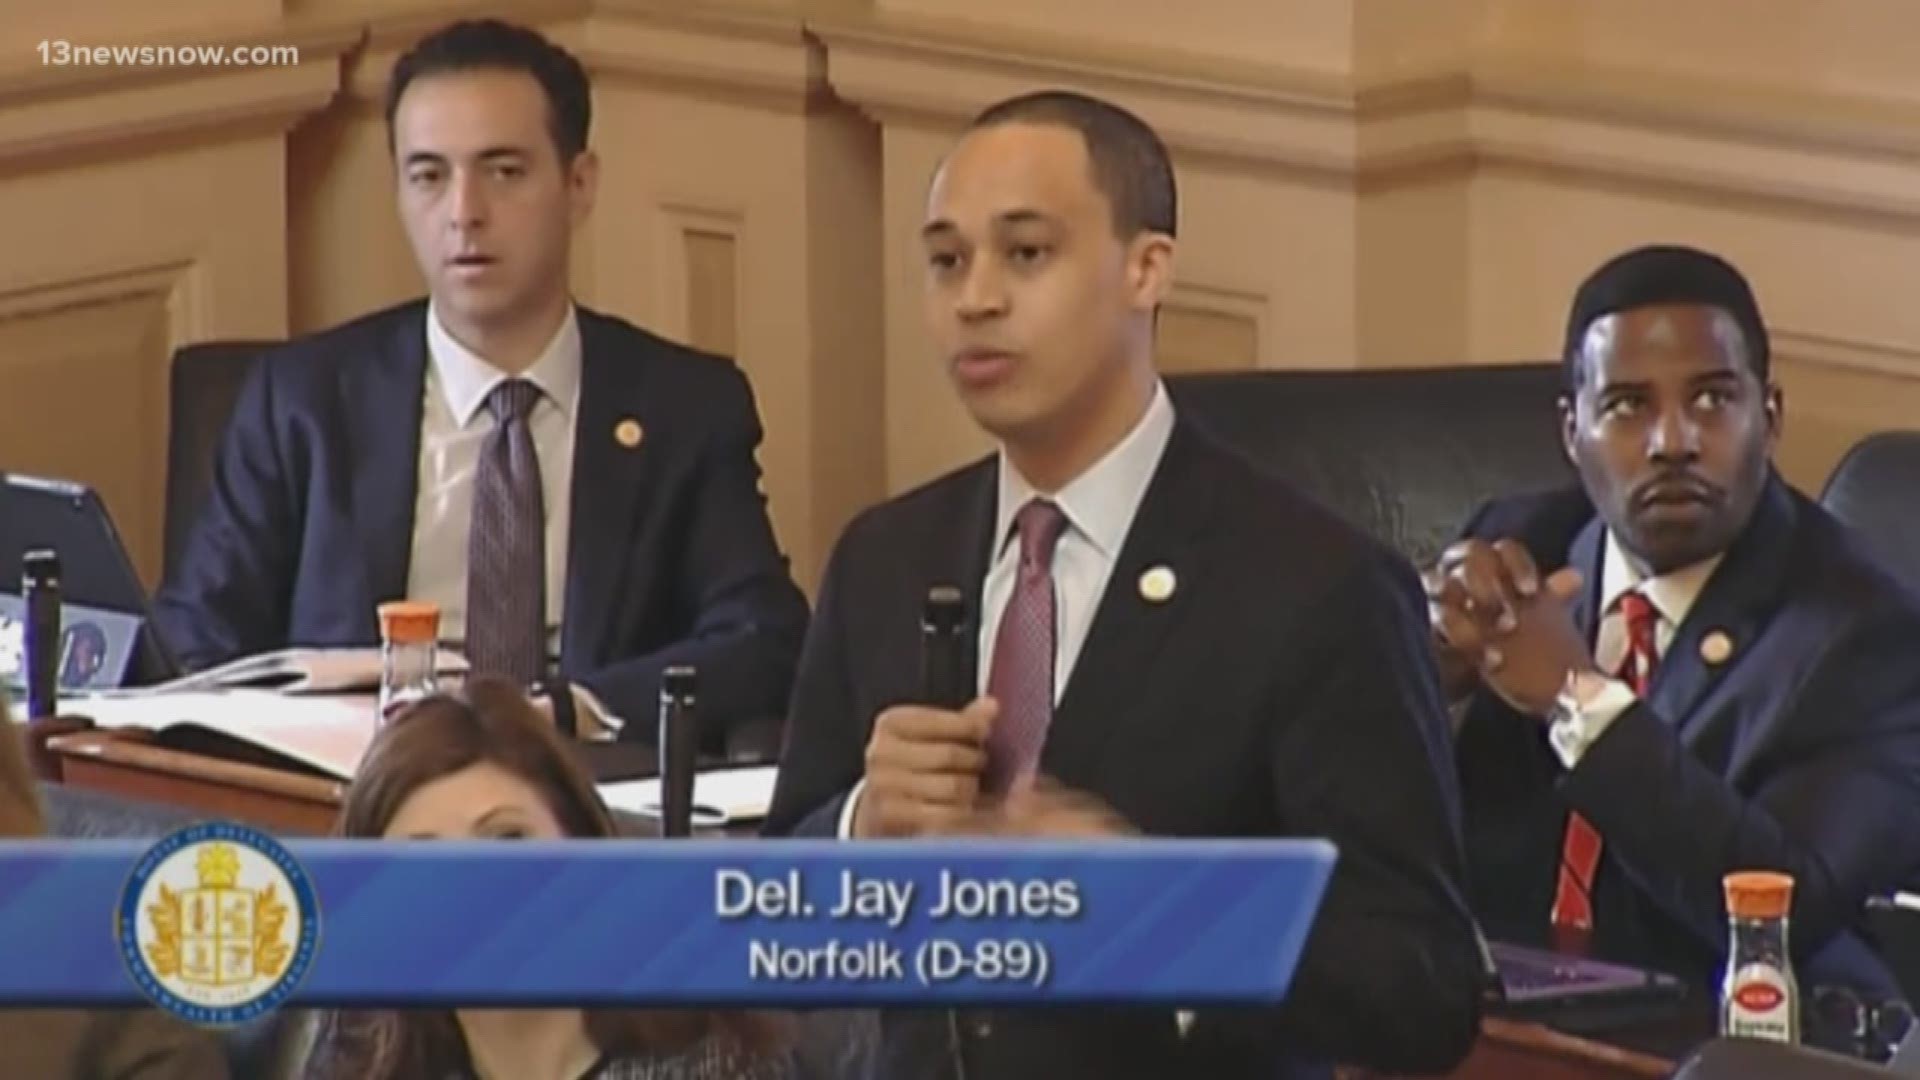 A speech given on the house floor by Norfolk Delegate Jay Jones is getting widespread praise.